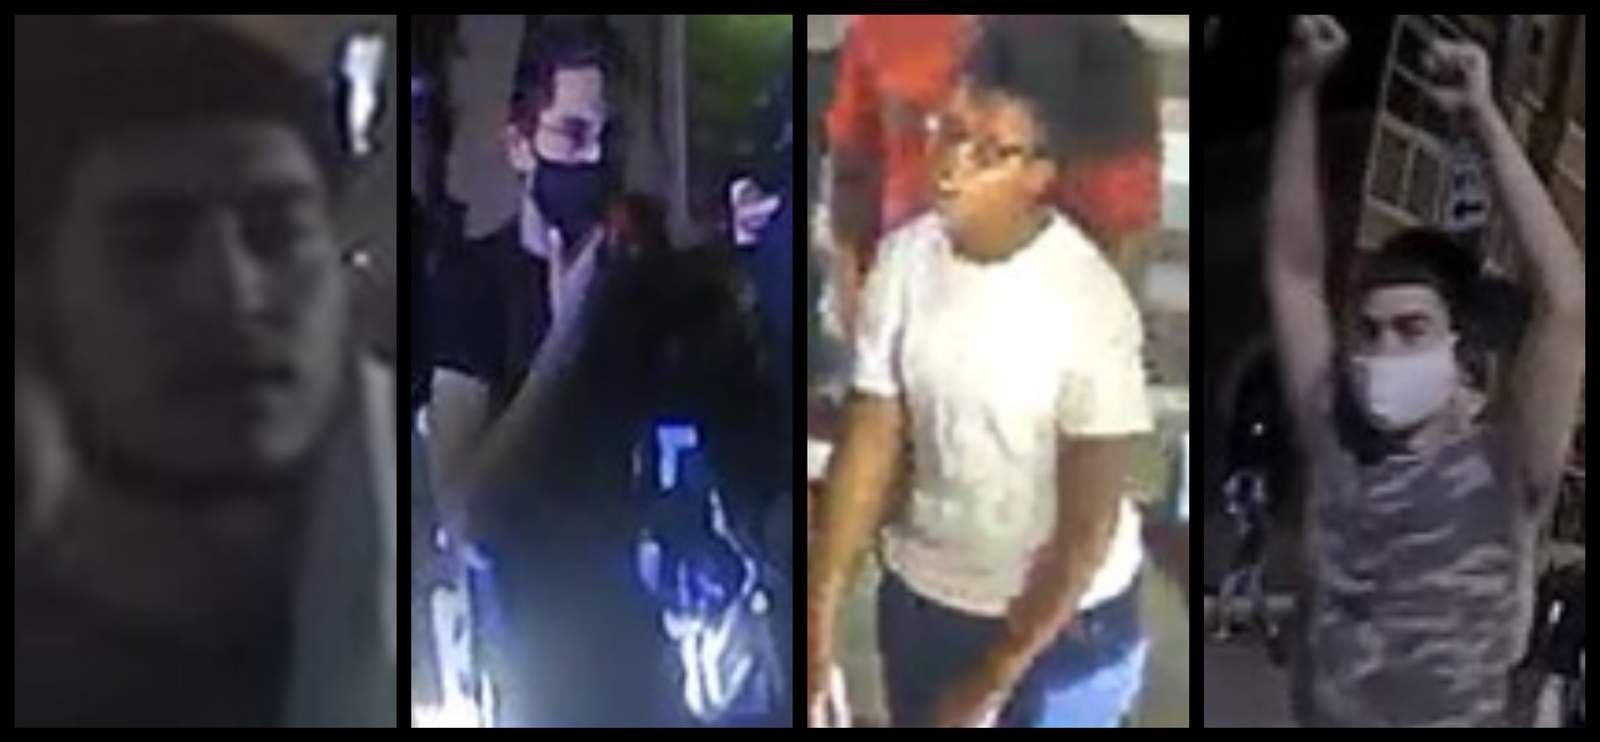 Houston police are searching for multiple suspects seen assaulting an officer during police brutality protests on May 29